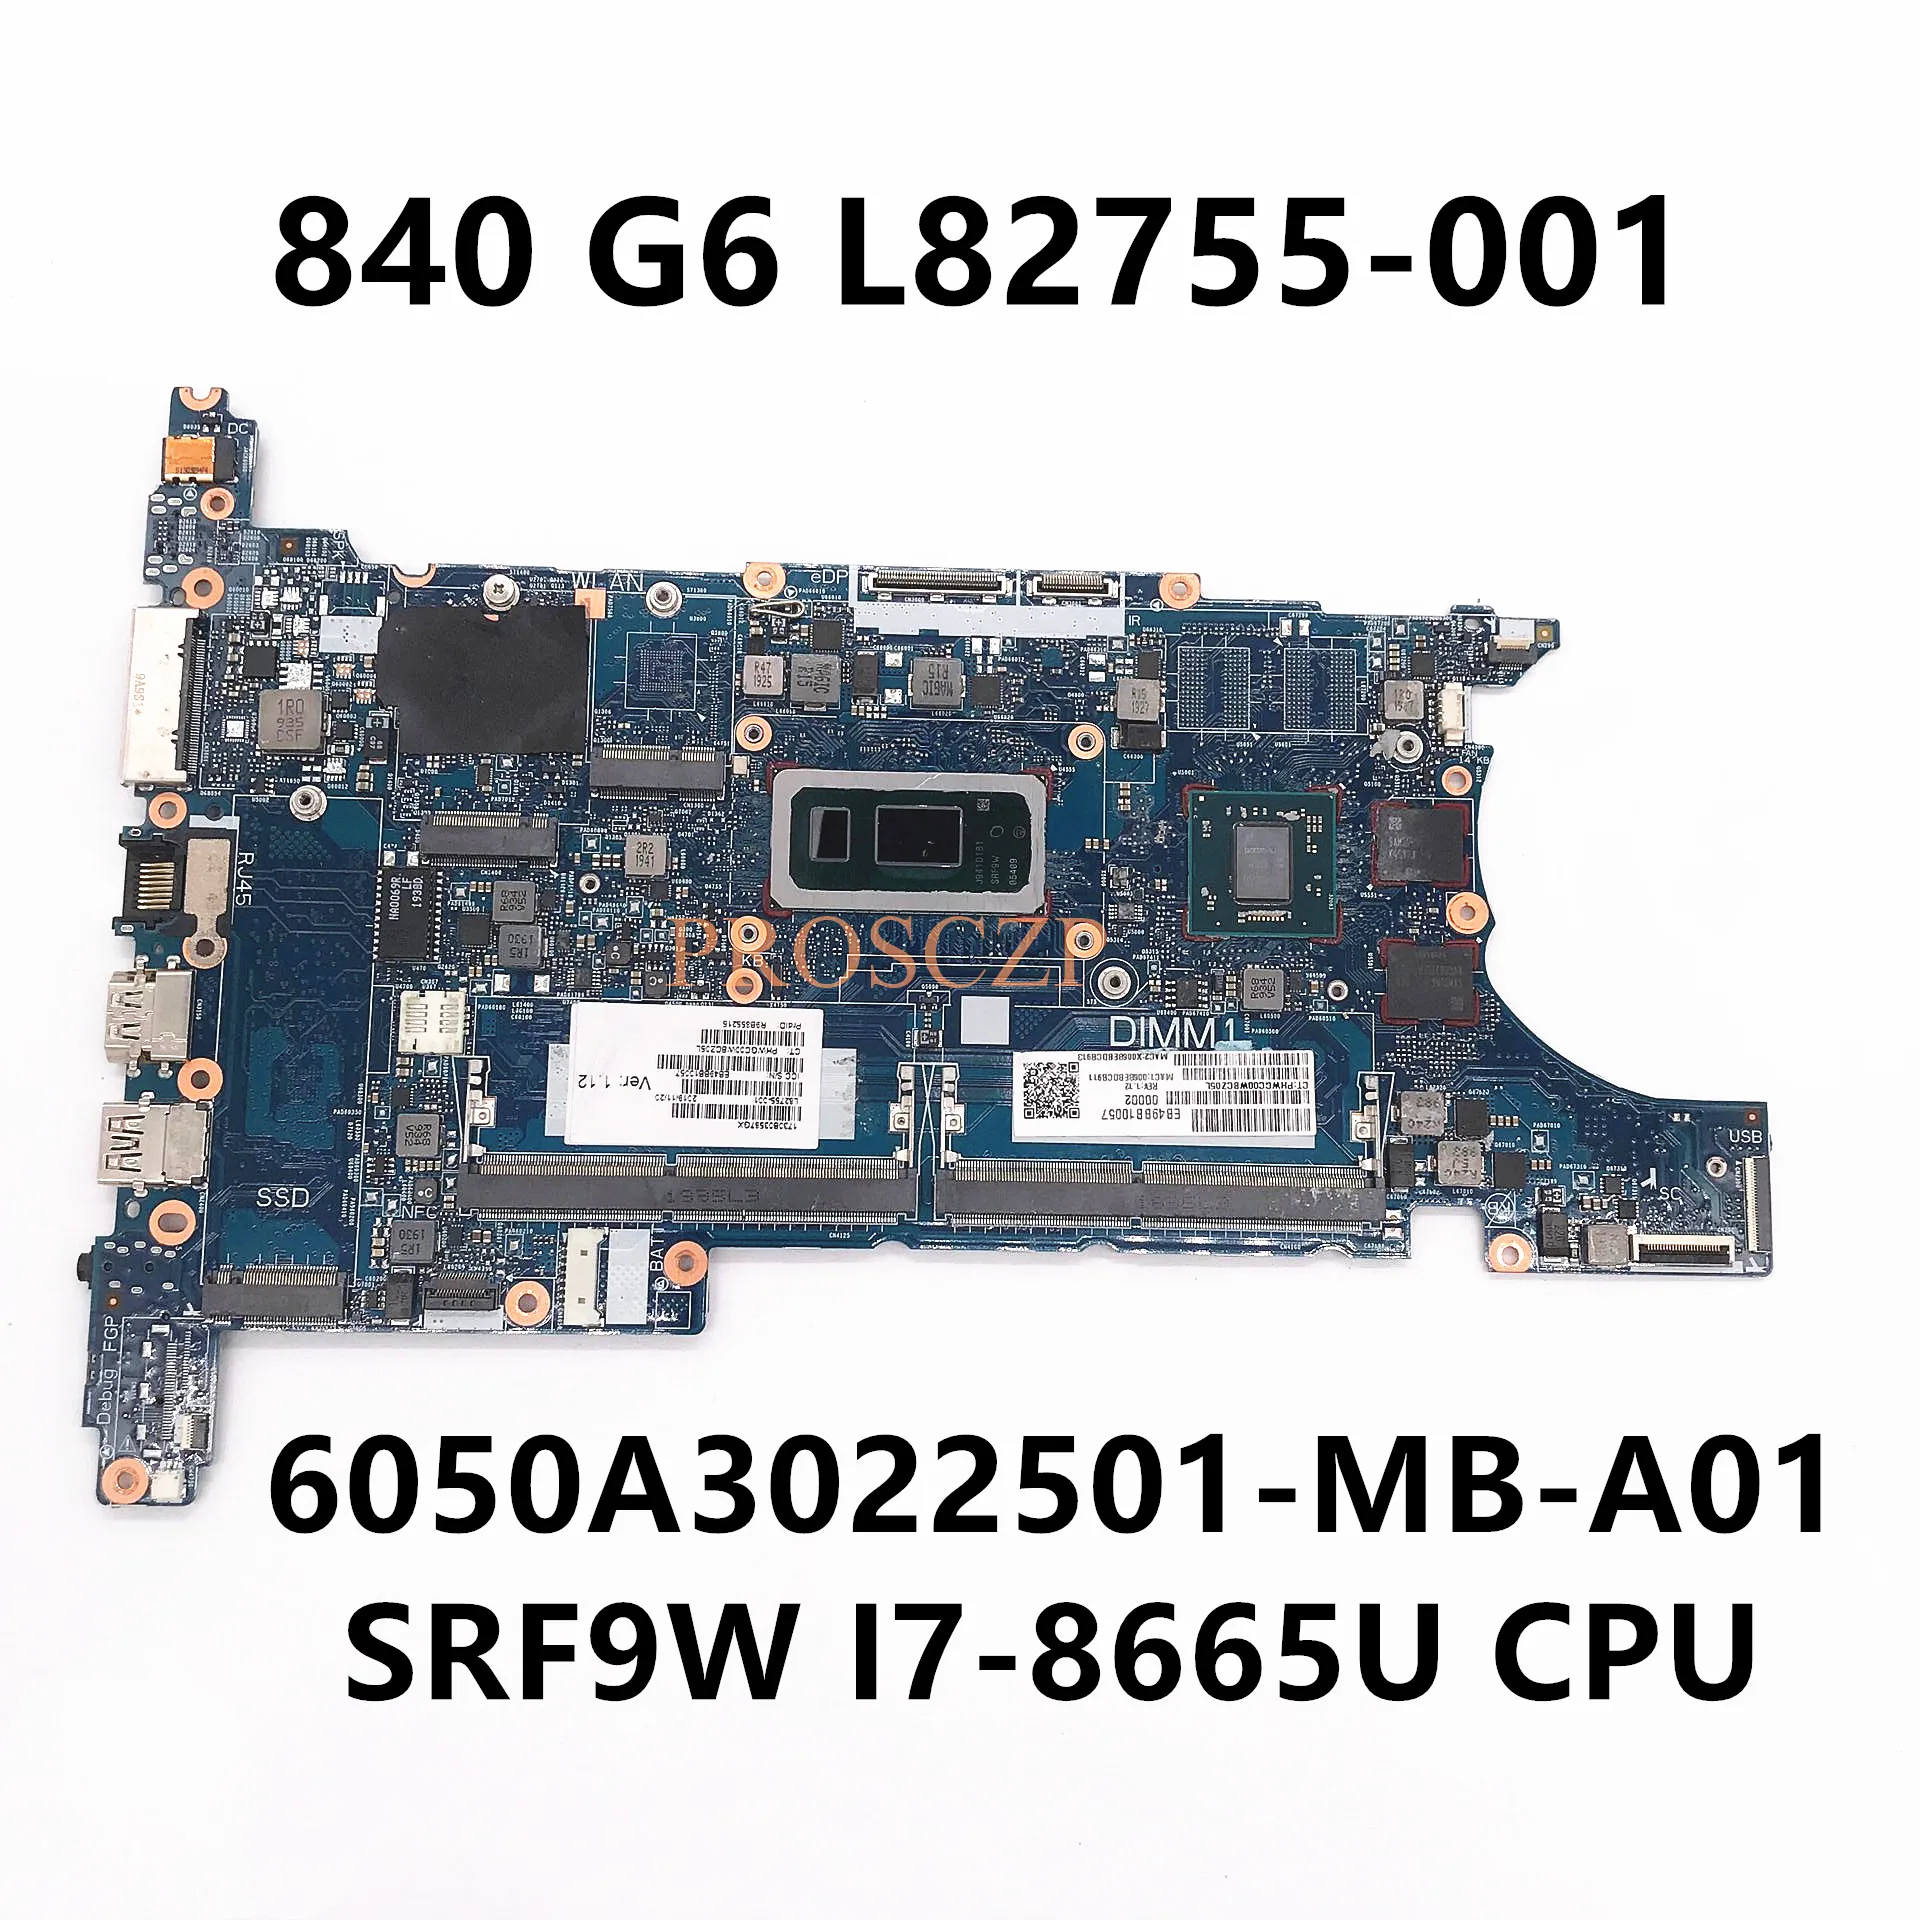 

L82755-001 L82755-601 High Quality For HP 840 G6 Laptop Motherboard 6050A3022501-MB-A01 W/ SRF9W I7-8665U CPU 100% Working Well